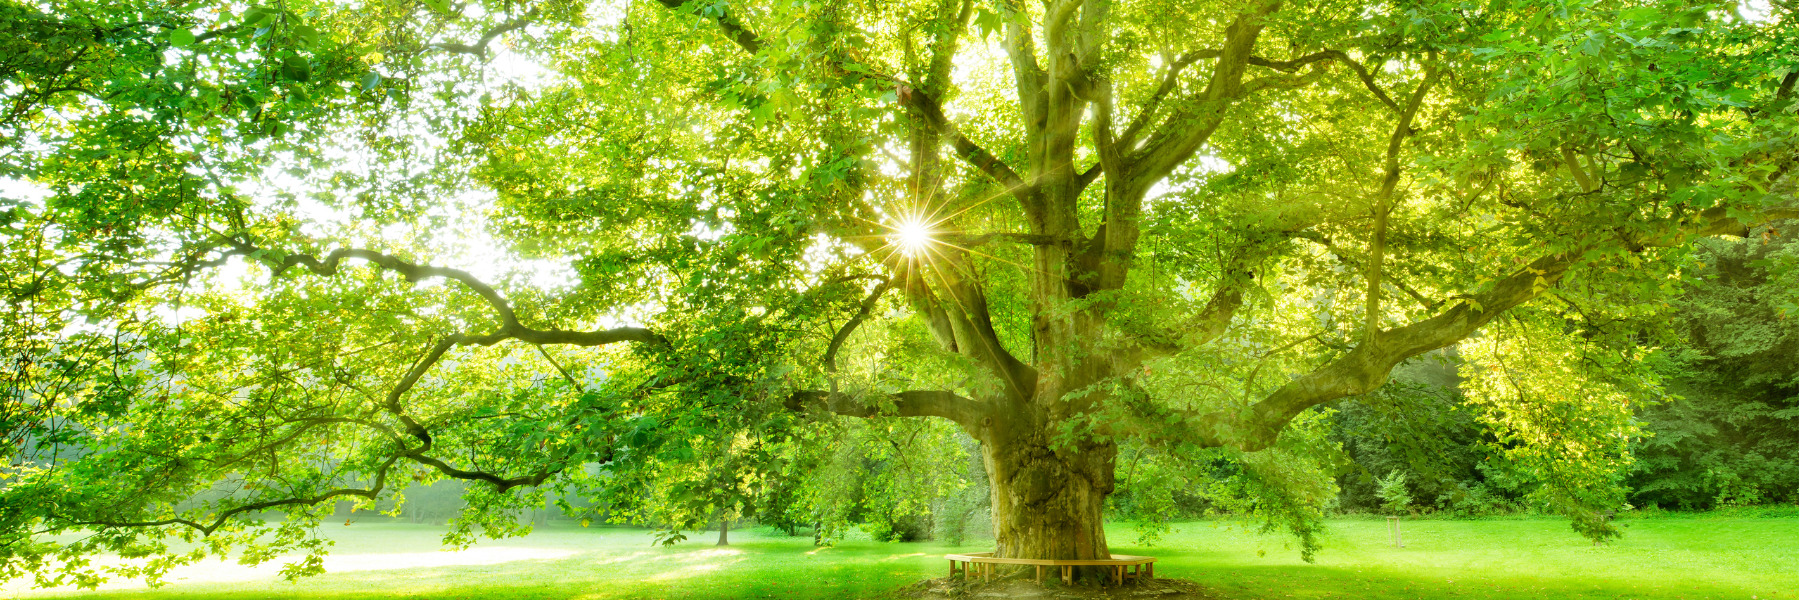 large tree with sunlight shinning through leaves